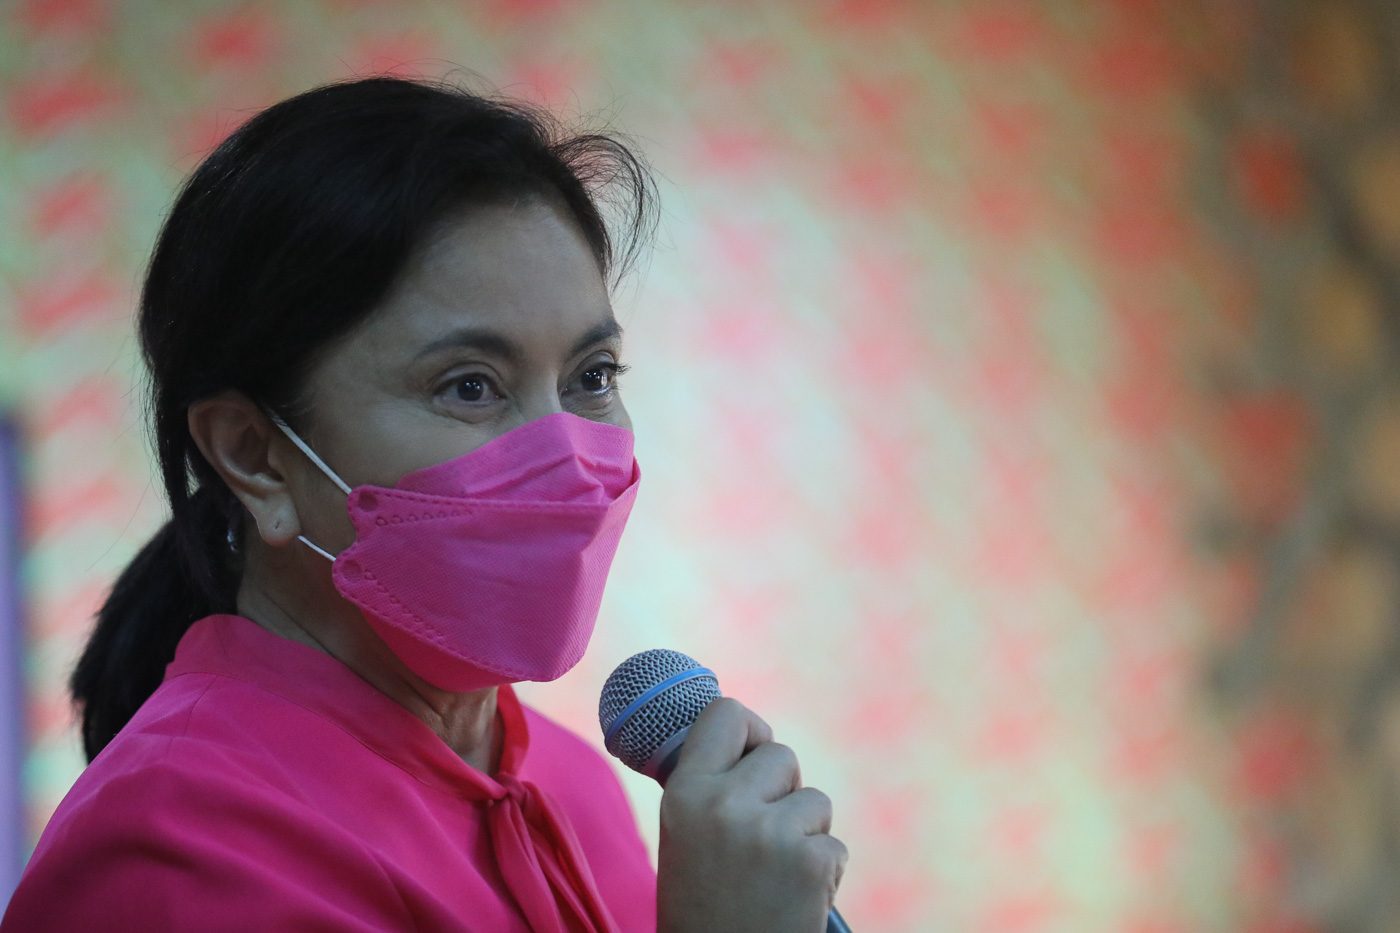 ‘Very conflicted’: Robredo still anti-abortion, but open to listen for extreme cases